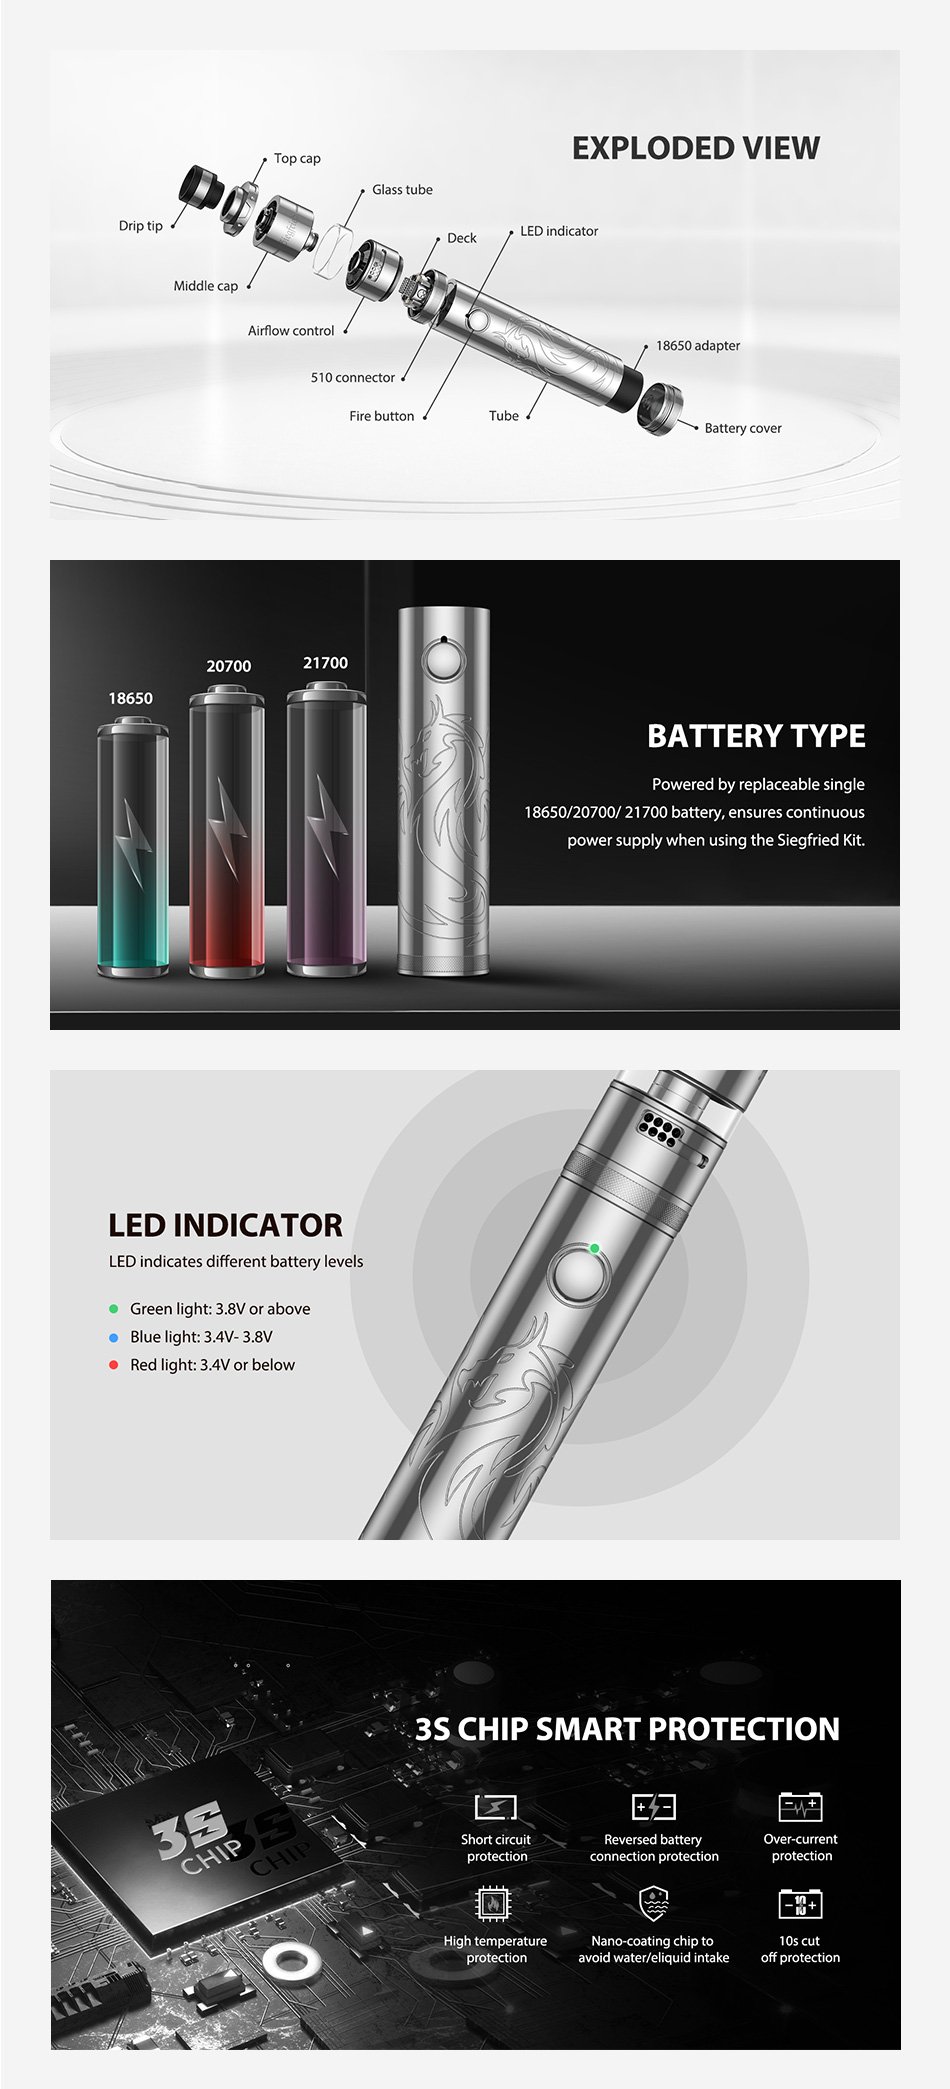 Image is split into four different sections. First image shows a labelled deconstruction of the different features of the Vapefly Siegfried Tube Kit. The labels are “Drip tip, top cap, middle cap, glass tube, airflow control, deck, 510 connector, fire button, LED indicator, tube, 16850 adapter and battery cover. The second image shows a graphic of each different battery that is compatible with the Siegfried Tube Kit, with the sterling silver body of the vape next to it. Text reads “Battery type. Powered by replaceable single 18650/20700/21700 battery, ensures continuous power supply when using the Siegfried Kit. Third image shows the LED battery life indicator, showing how the green, blue and red light indicate different battery levels. In the middle of the image there is a sterling silver Siegfried tube kit, highlighting green LED light to show what it looks like in use. The text reads “LED indicator. LED indicates different battery levels. Green light: 3.8V or above, blue light: 3.4V-3.8V, red light: 3.4 or below. Fourth image shows the 3S chip and the multiple protections. Texts reads: “Short-circuit protection, reversed battery connection protection, over-current protection, high temperature protection, nano-coating chip to avoid water/liquid intake, 10s cut-off protection”.